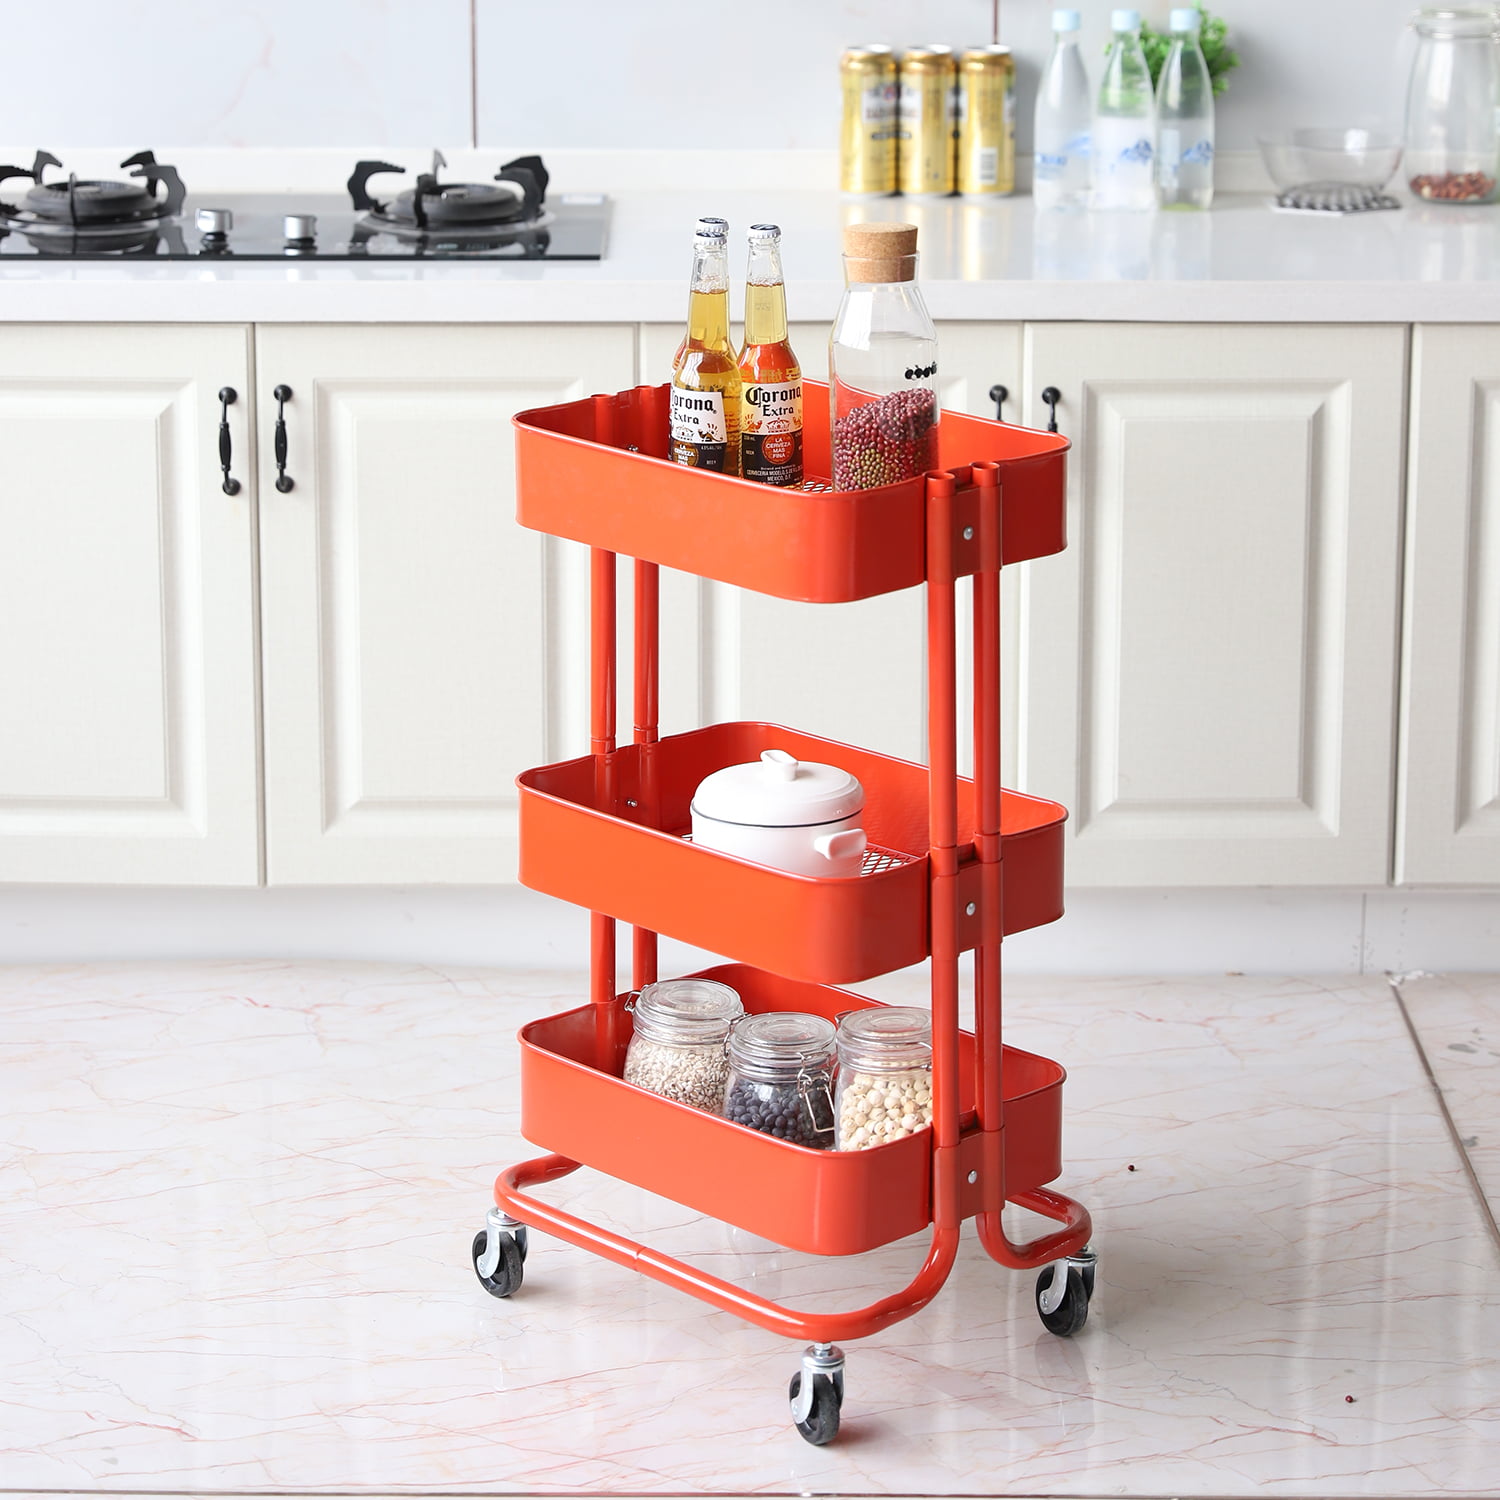 Details about   Utility Cart Trolley Organizer Storage 3Tier Tool Service Rolling Salon SpaY201H 